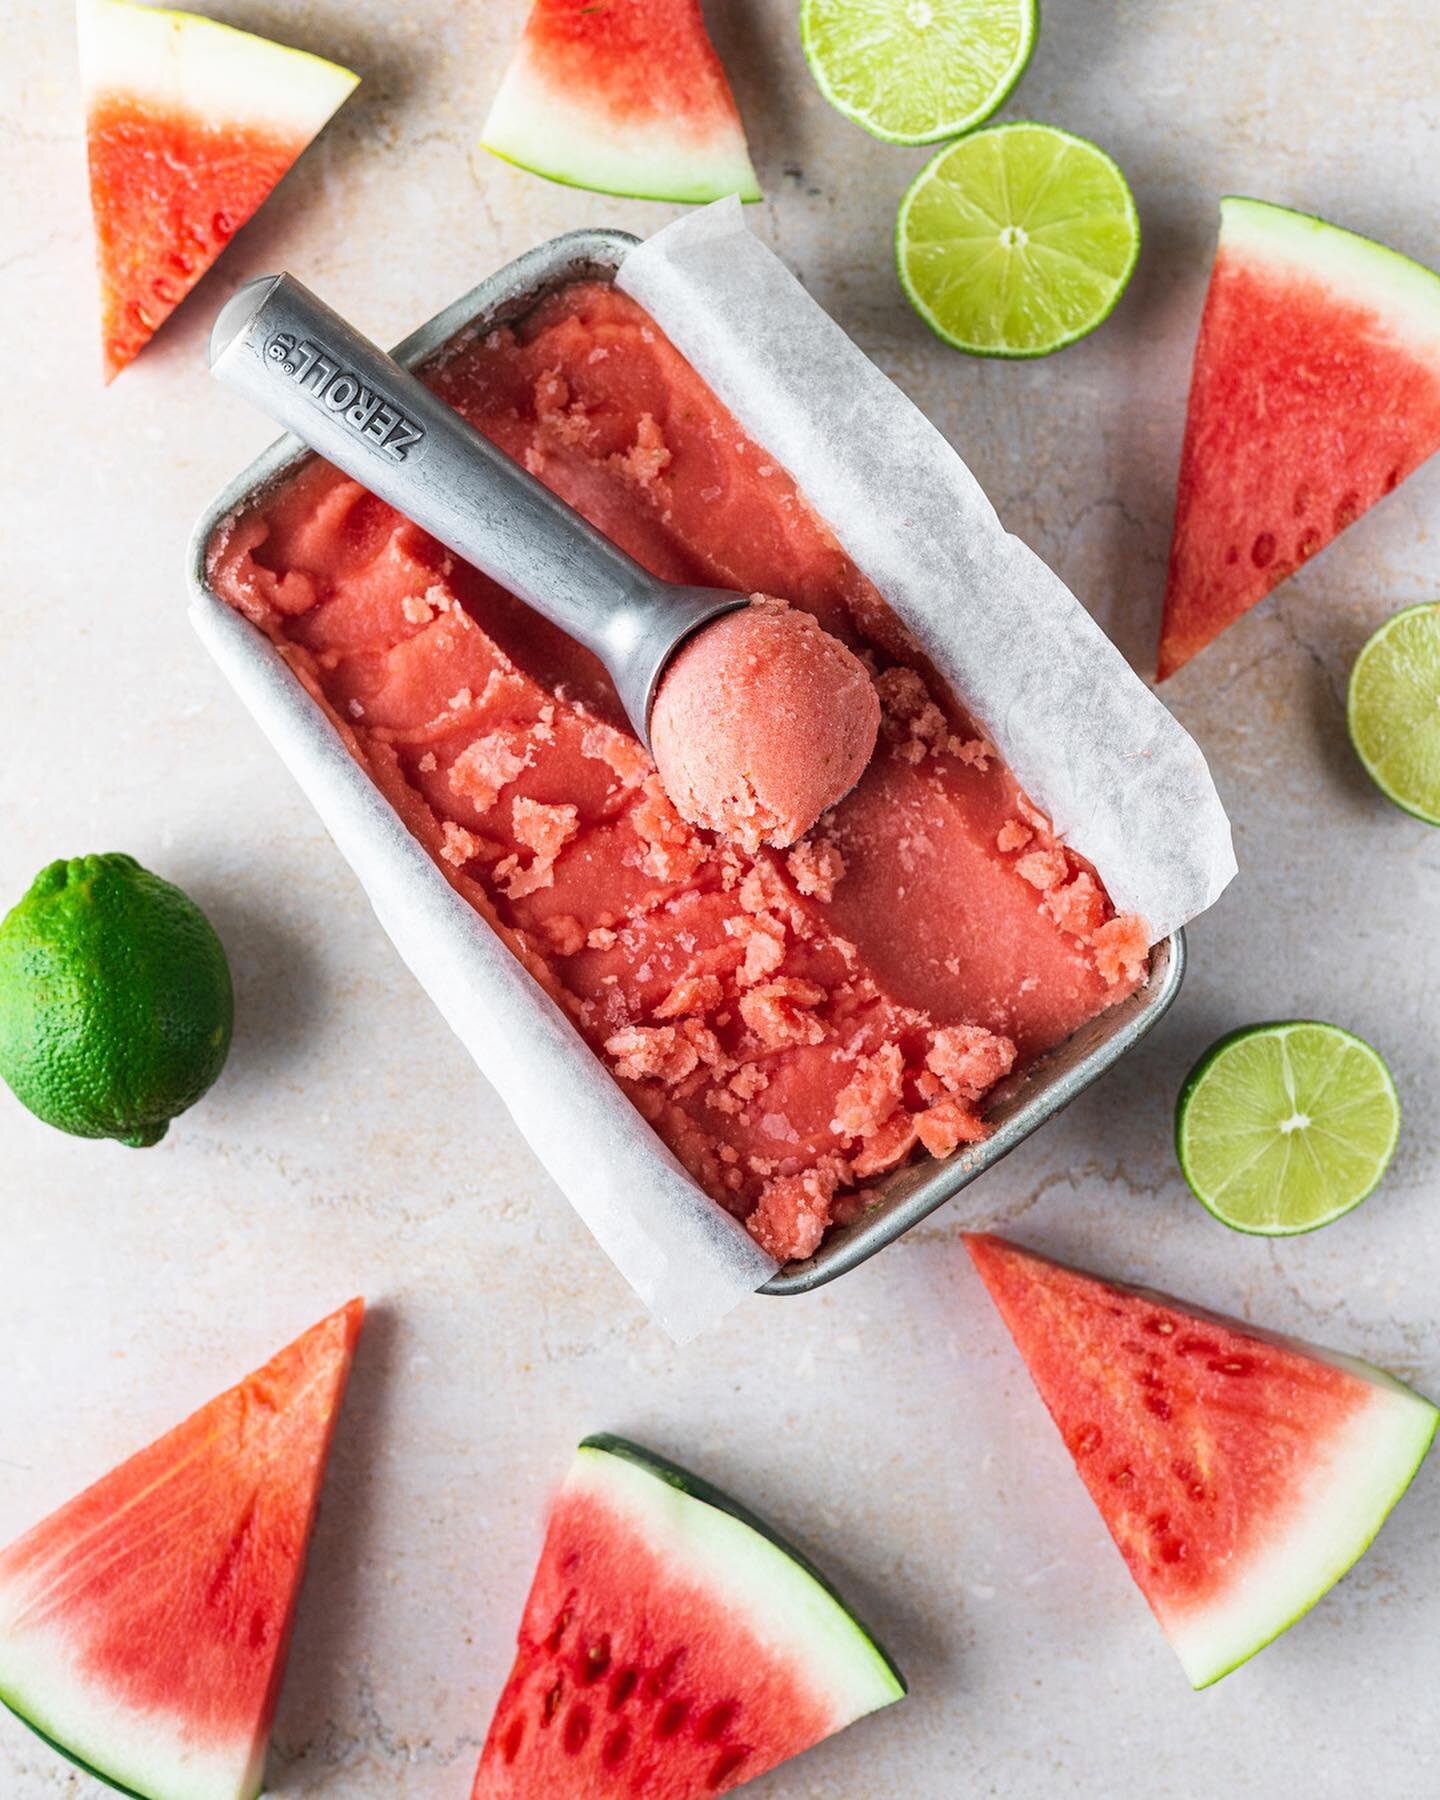 🍉 Watermelon Lime Sorbet Recipe, now available on the Bread &amp; Basil blog! 🍉
⠀⠀⠀⠀⠀⠀⠀⠀⠀
It's been a MINUTE since I put a new recipe up on the blog but I am so happy to be back with this bright, delicious sorbet recipe. If you've been following fo